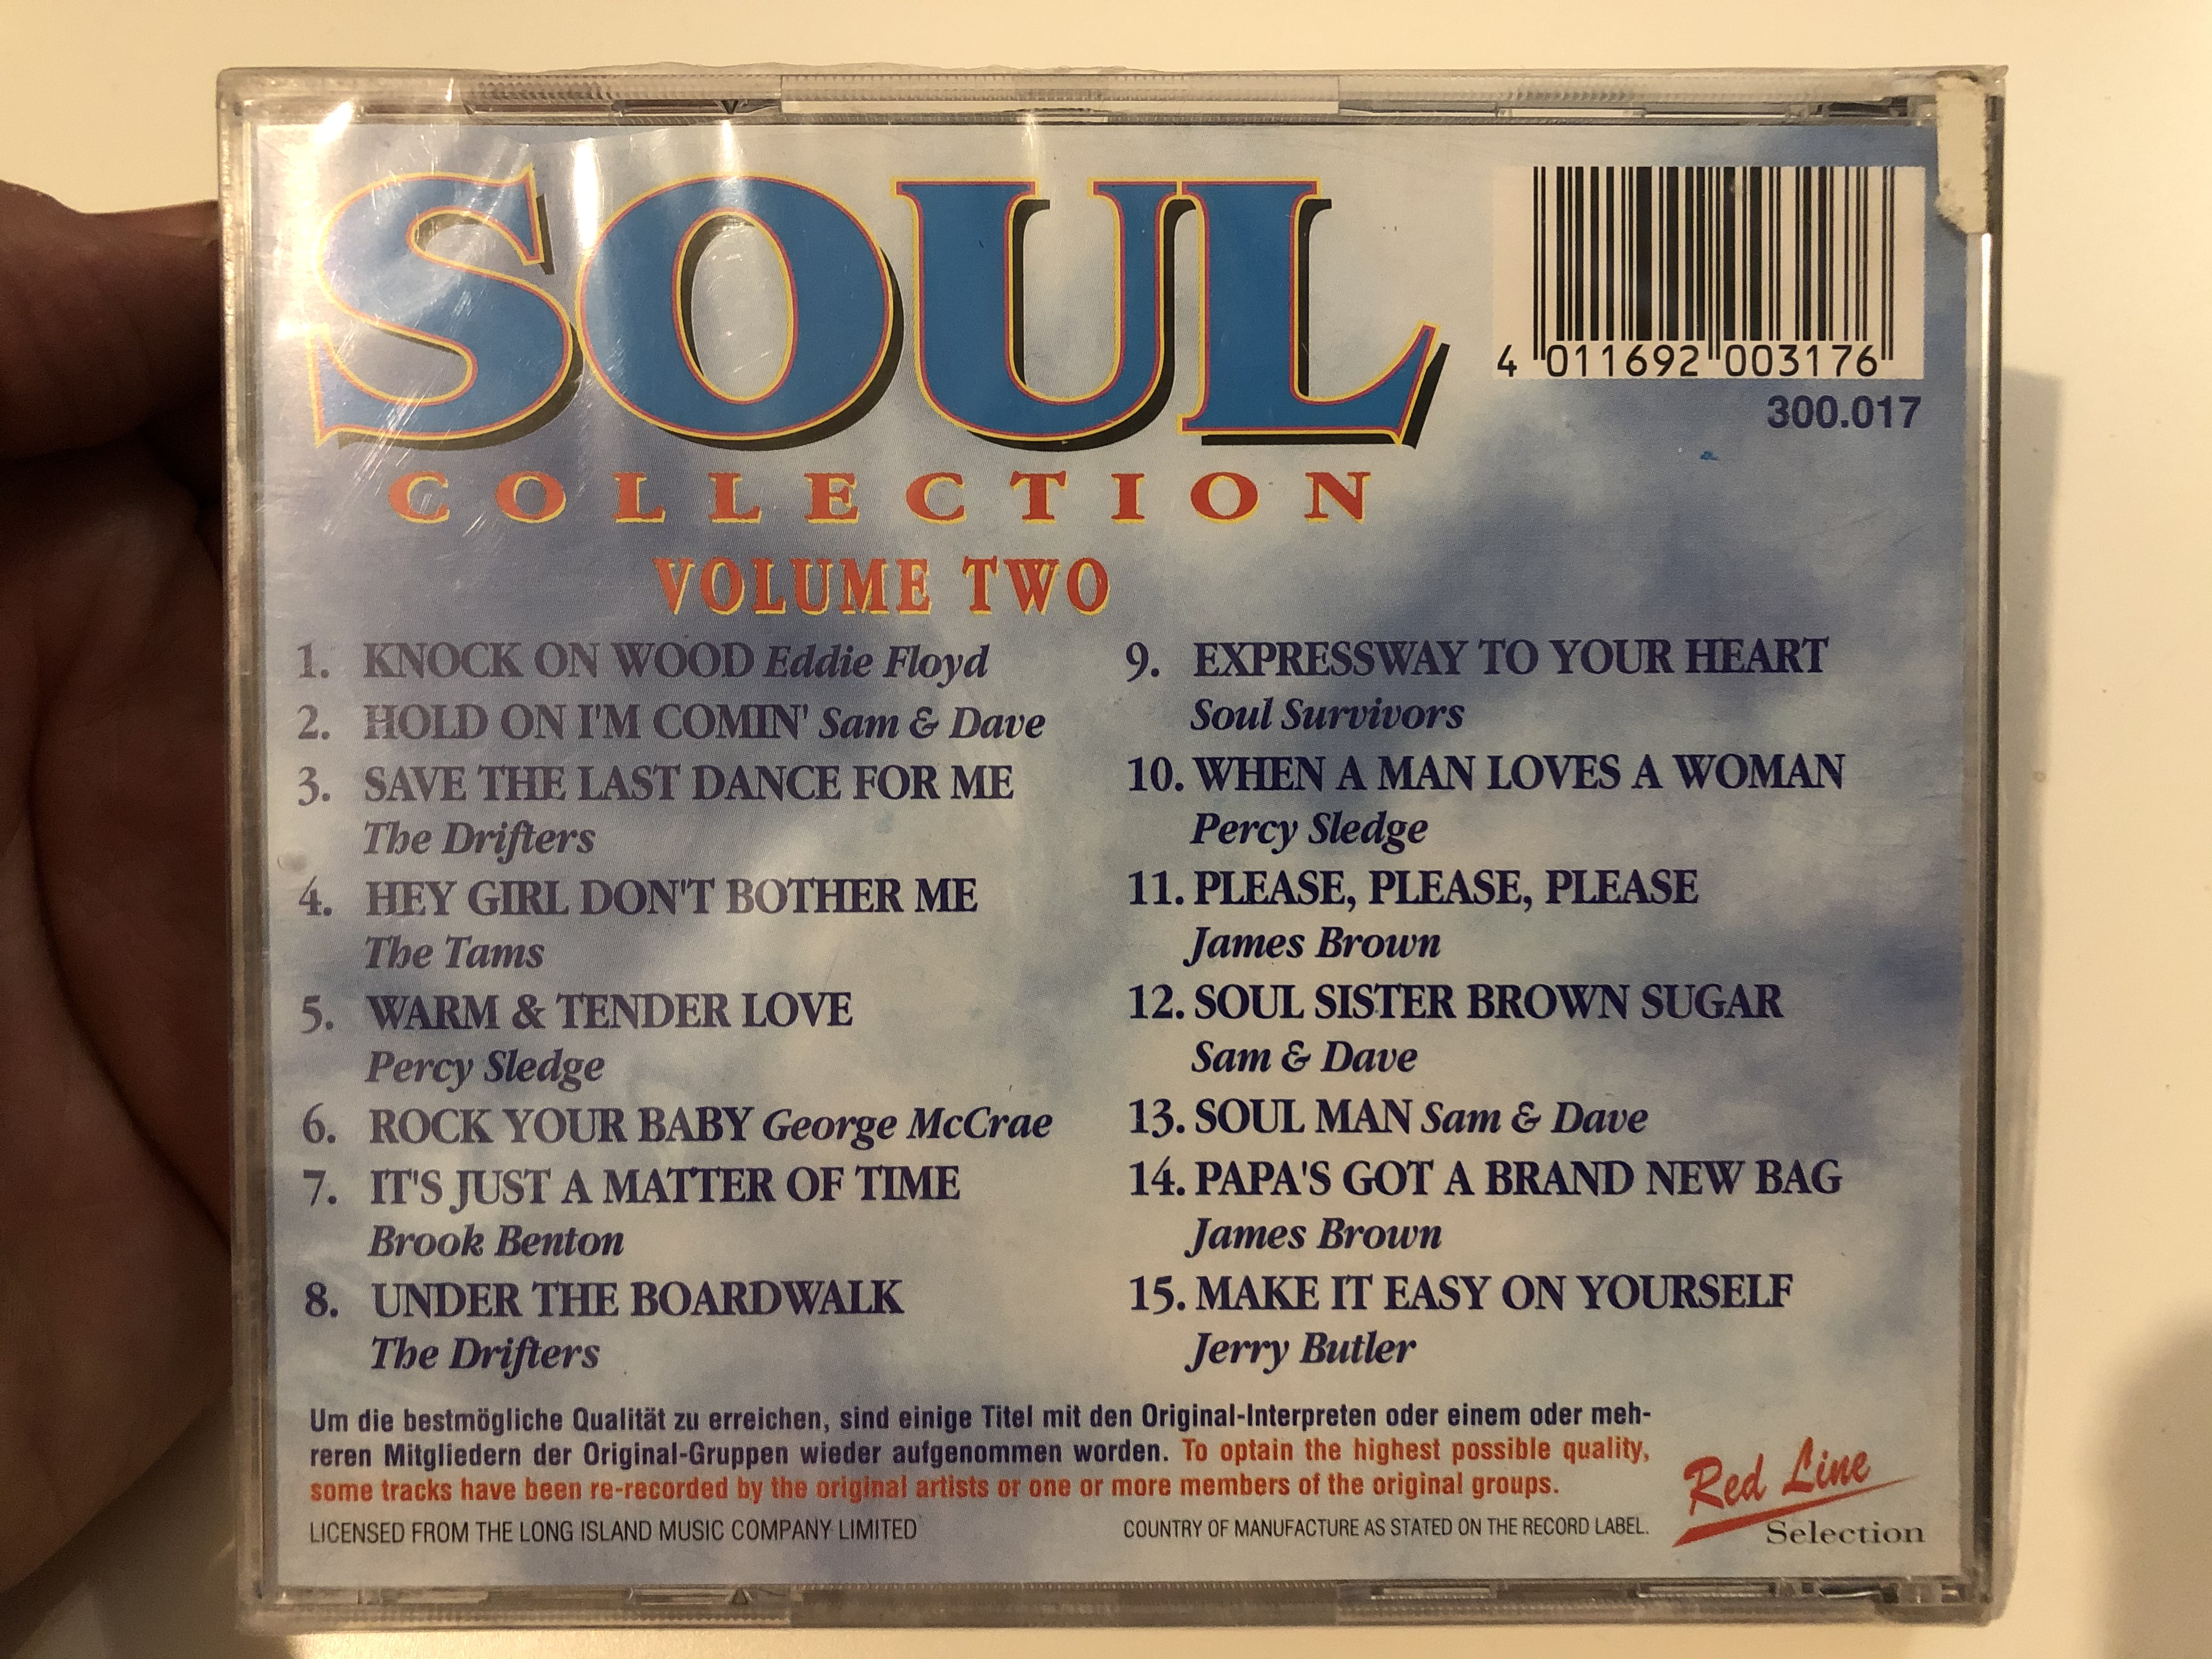 soul-collection-volume-one-brook-benton-james-brown-percy-sledge-george-mccrae-plus-many-more-red-line-selection-audio-cd-300-2-.jpg